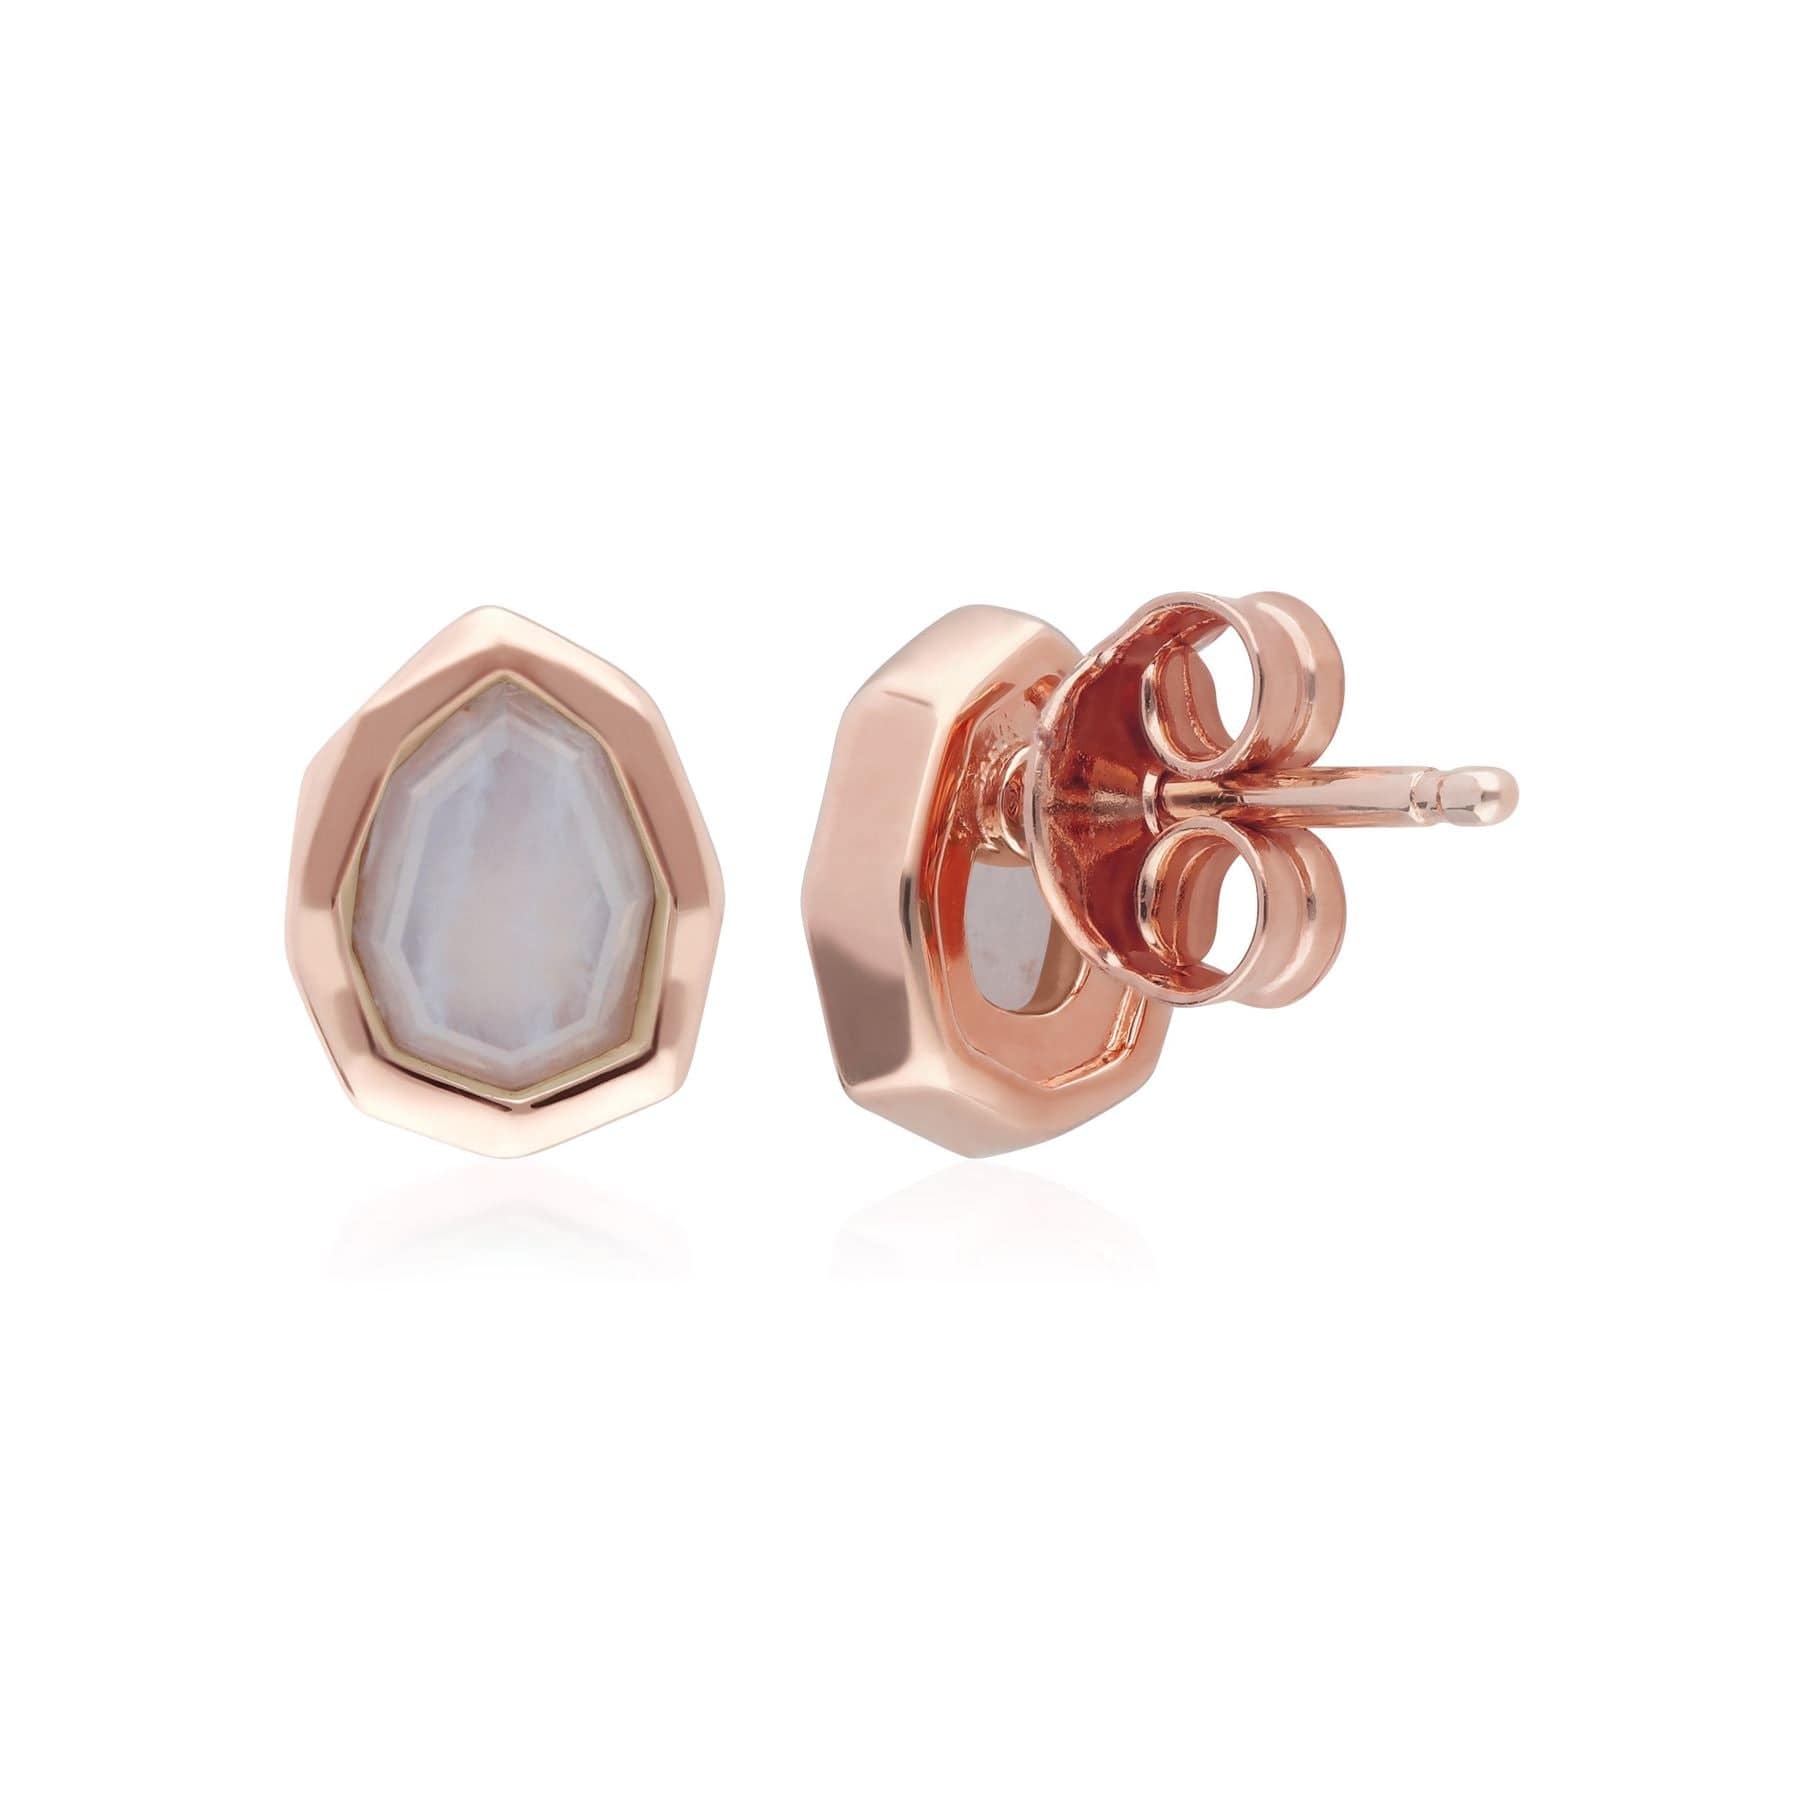 271E021201925 Irregular B Gem Blue Lace Agate Stud Earrings in Rose Gold Plated Silver 2